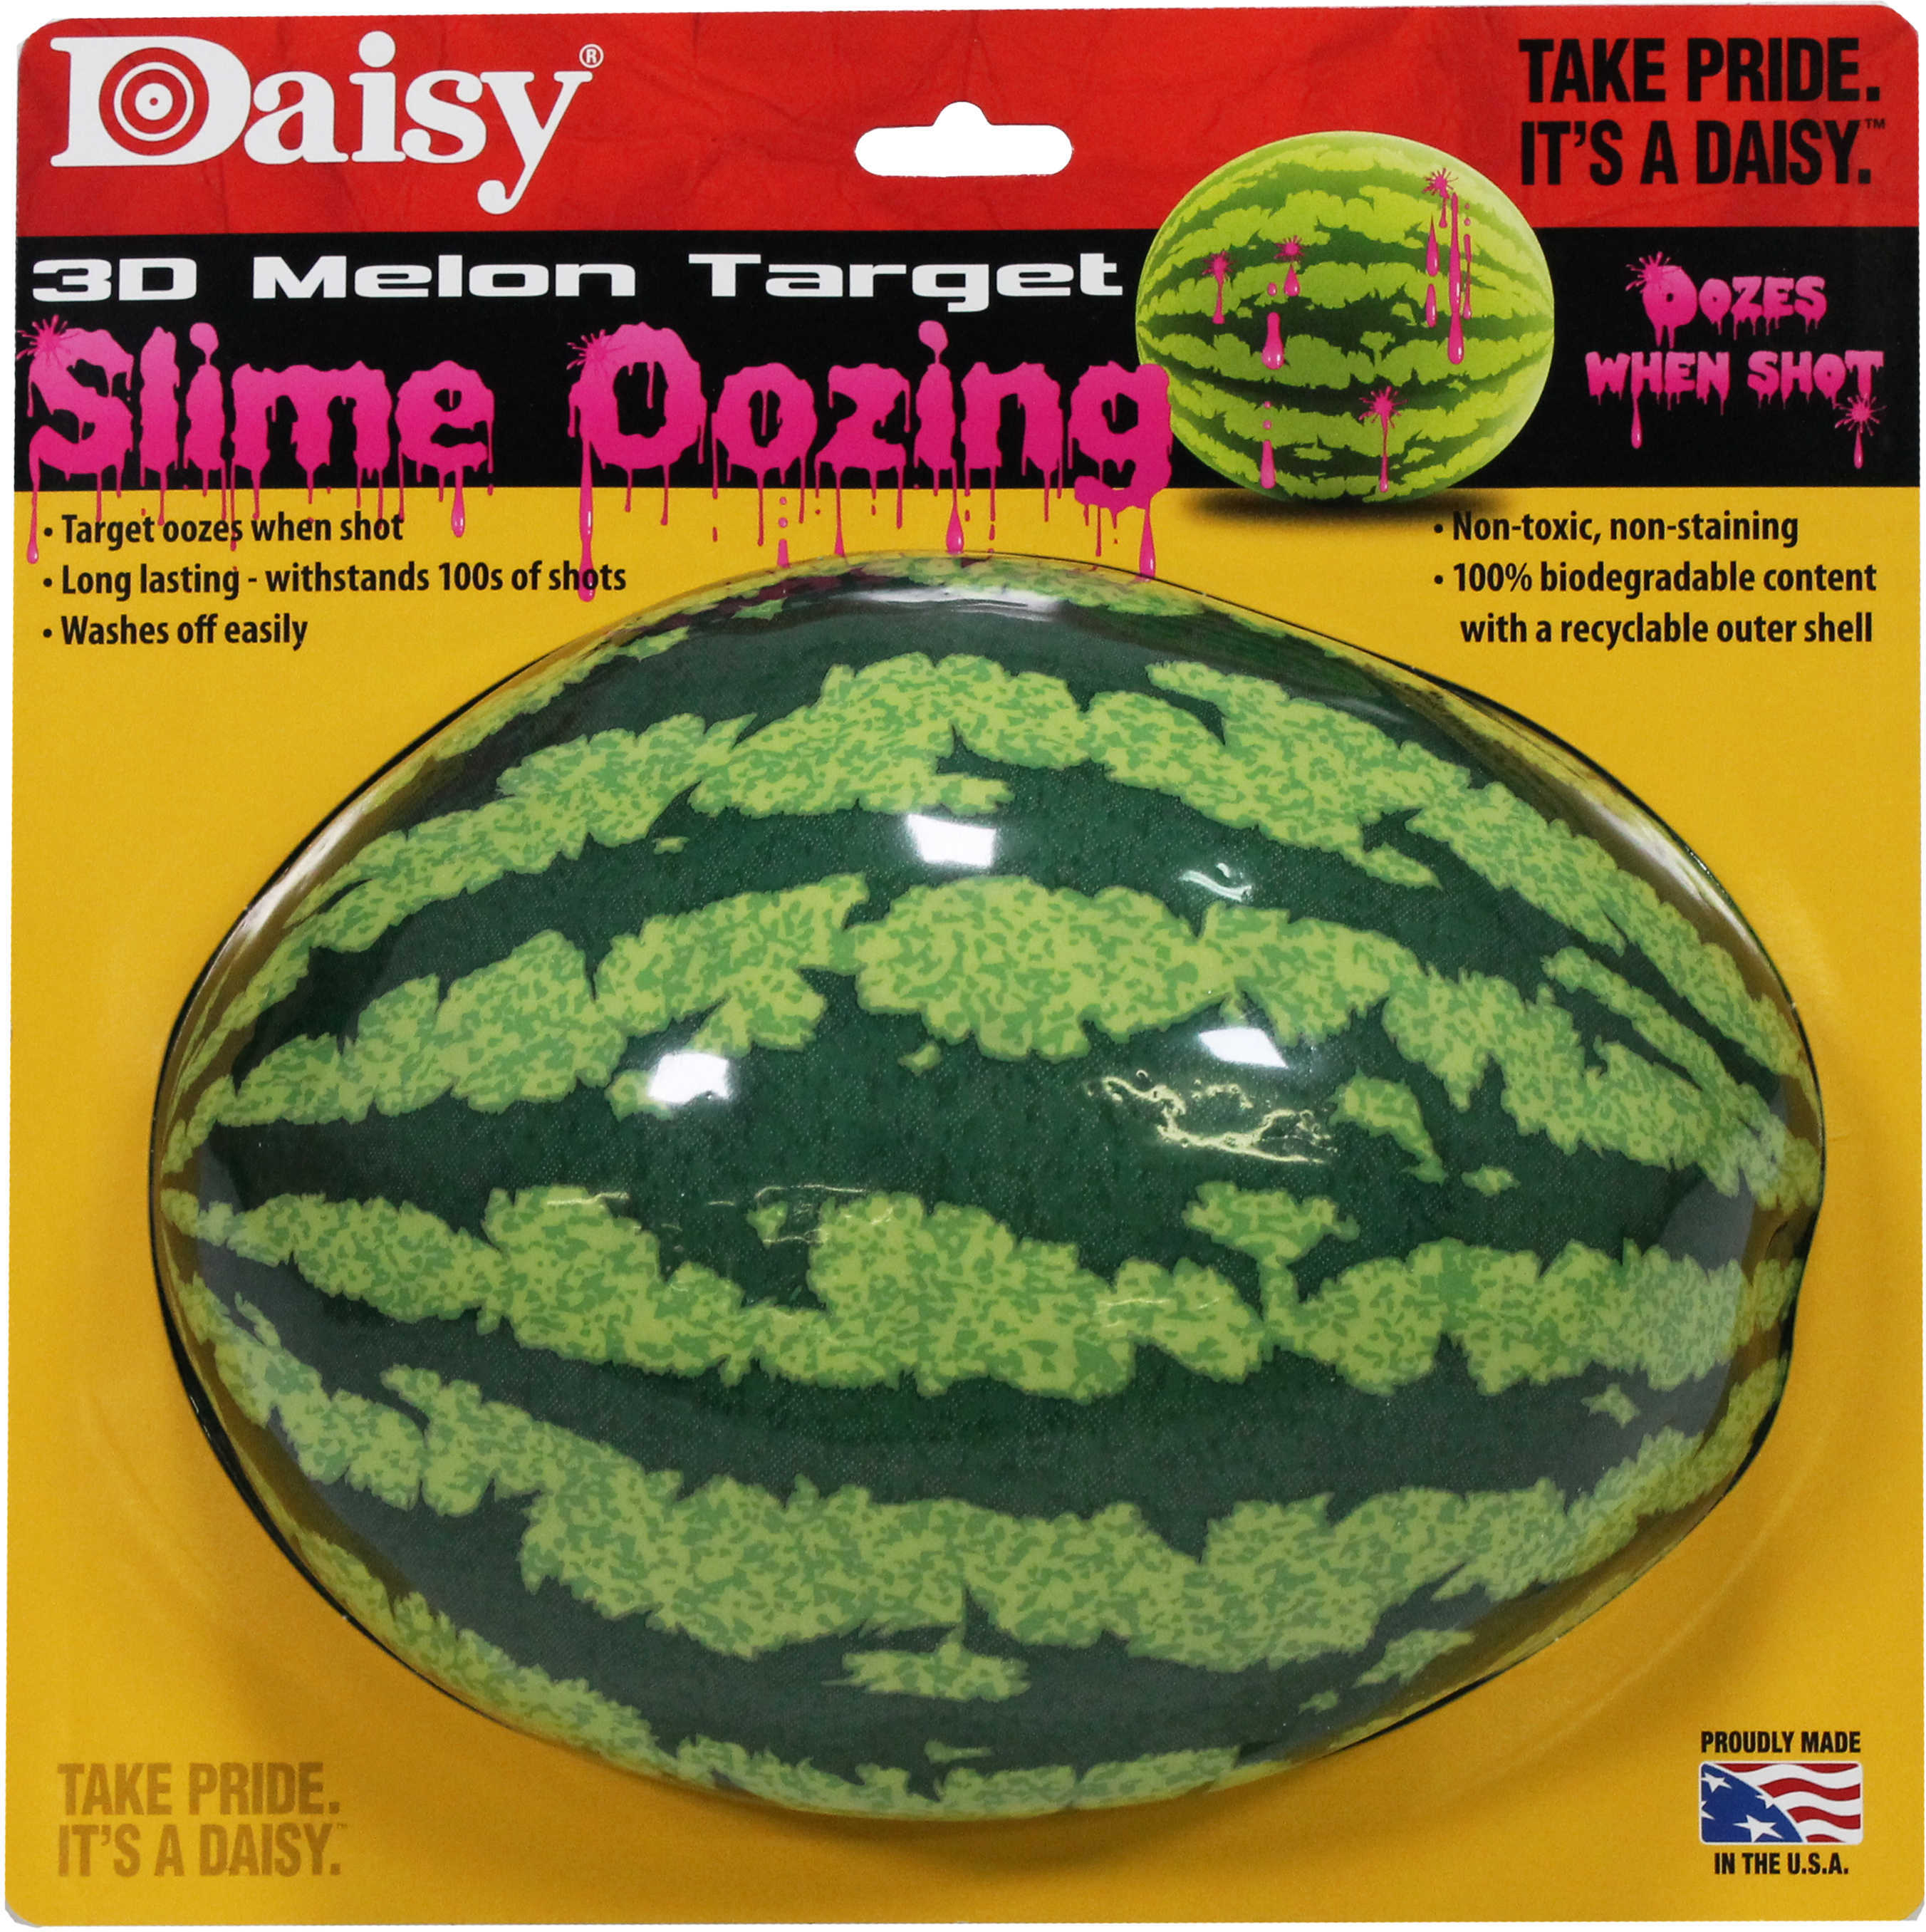 Daisy Outdoor Products OOZING 3D Melon Target